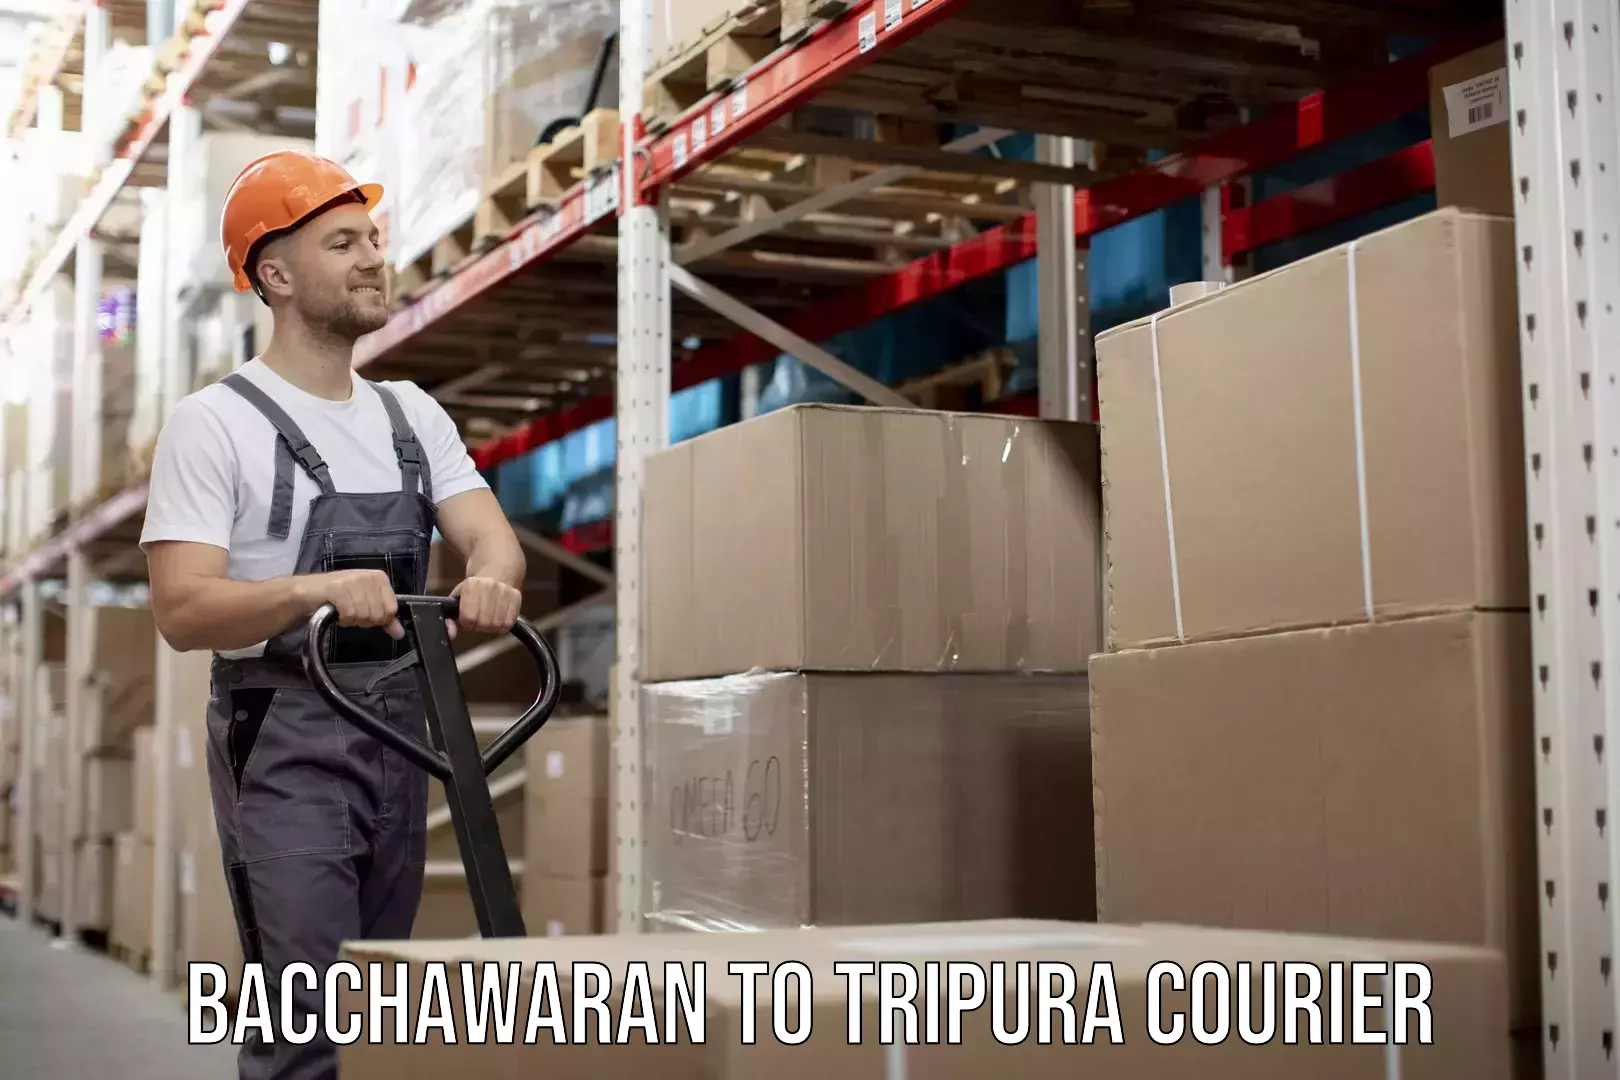 Express package services Bacchawaran to Tripura